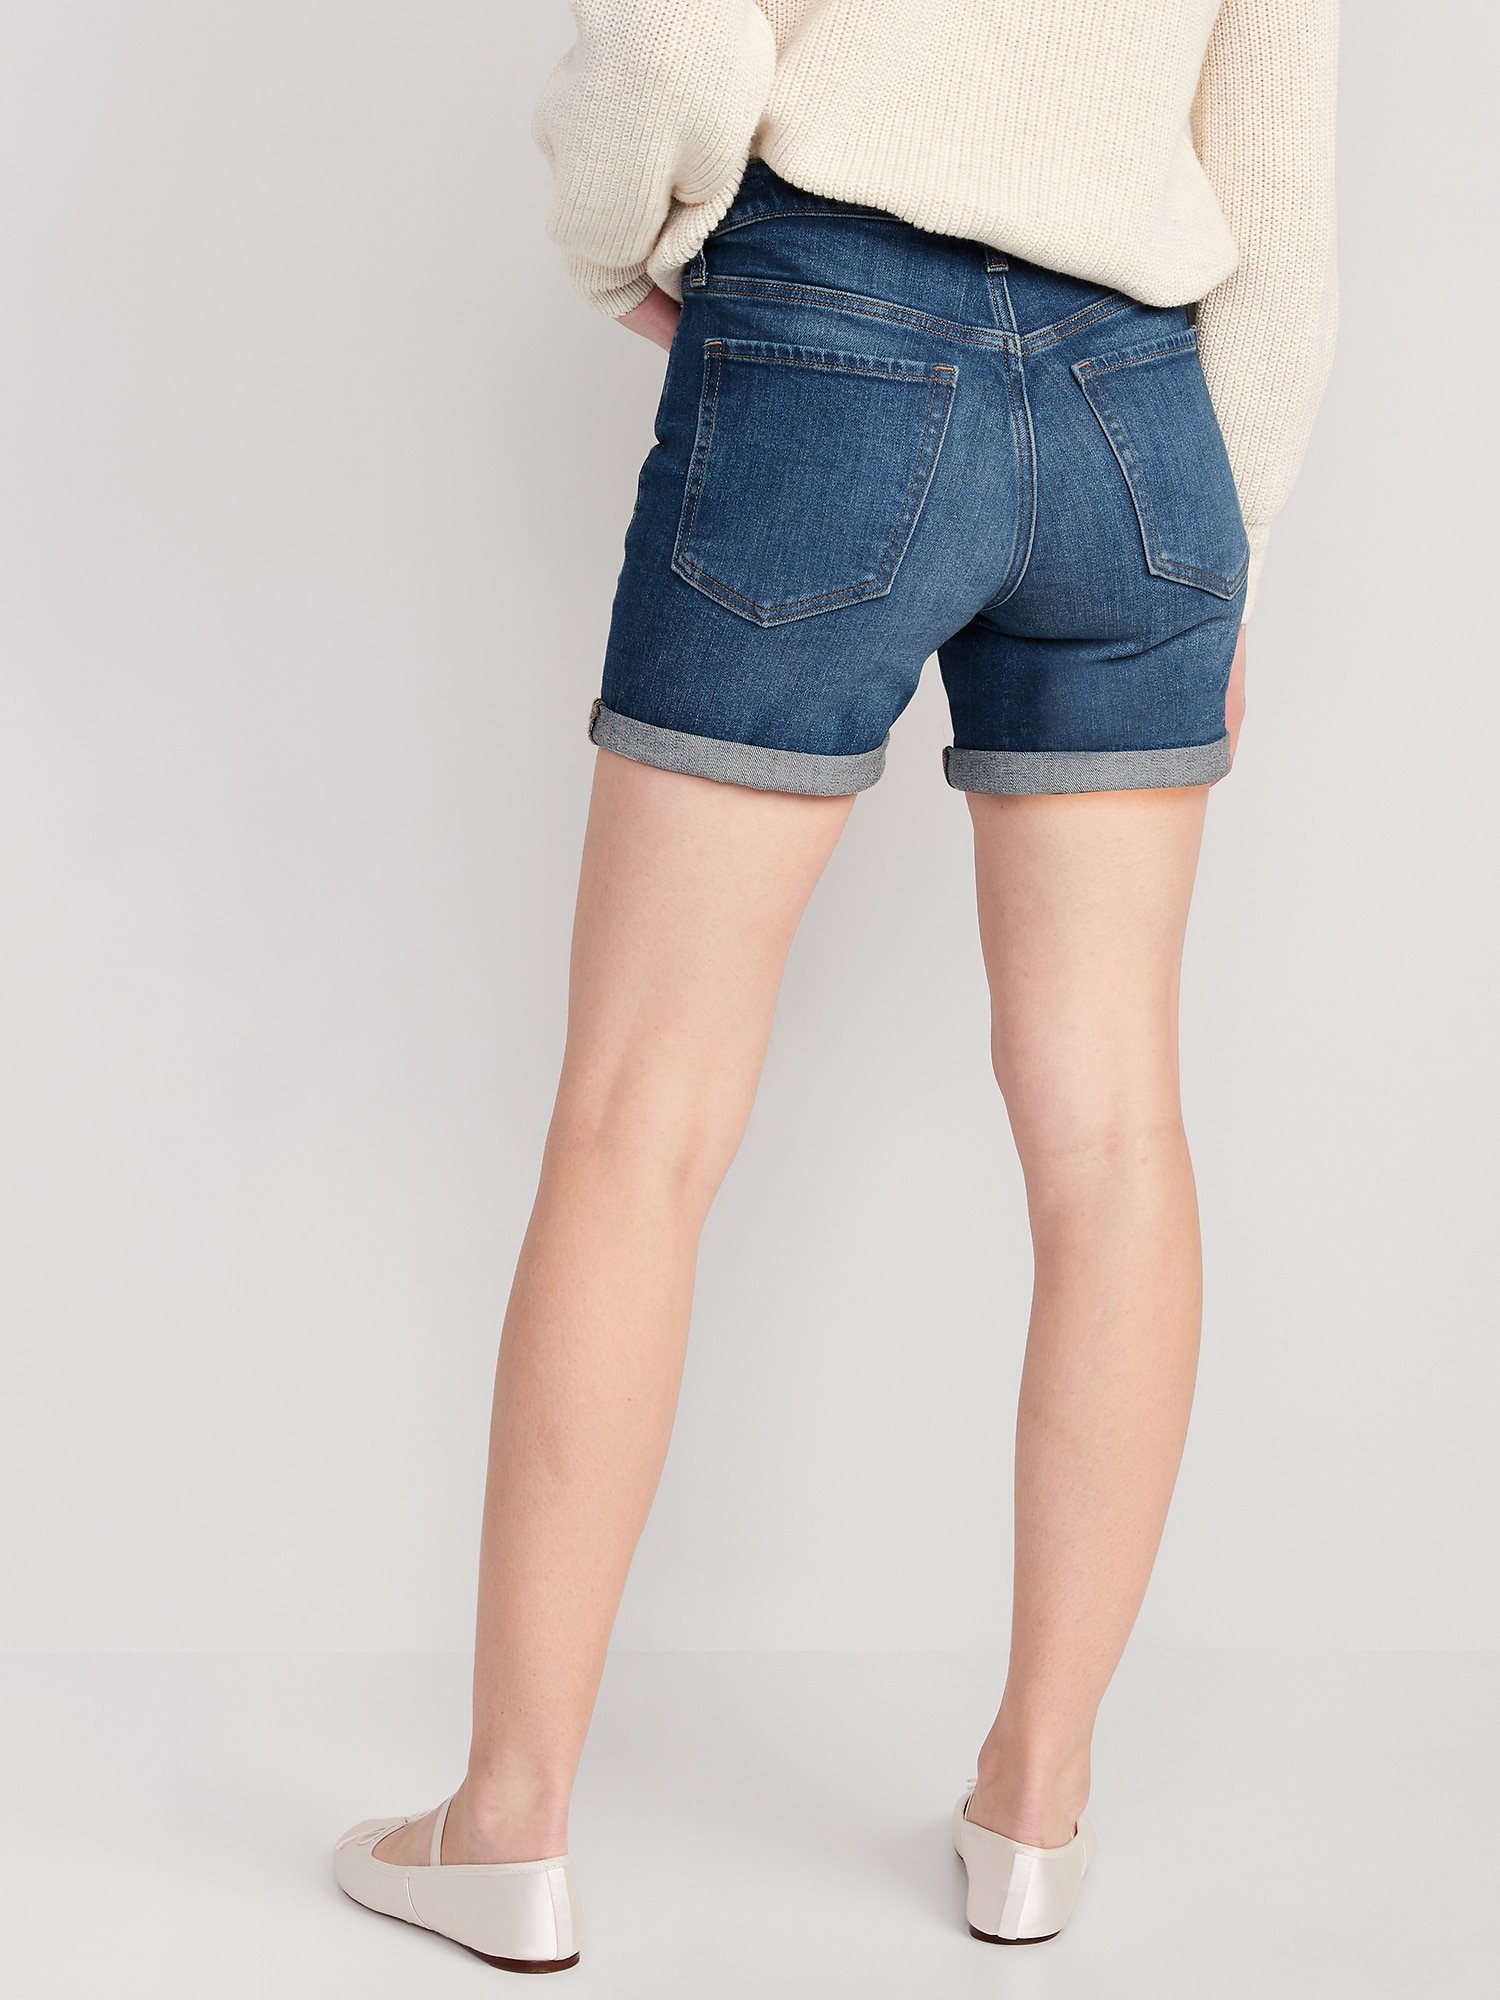 High-Waisted O.G. Straight Jean Shorts for Women -- 5-inch inseam | Old Navy